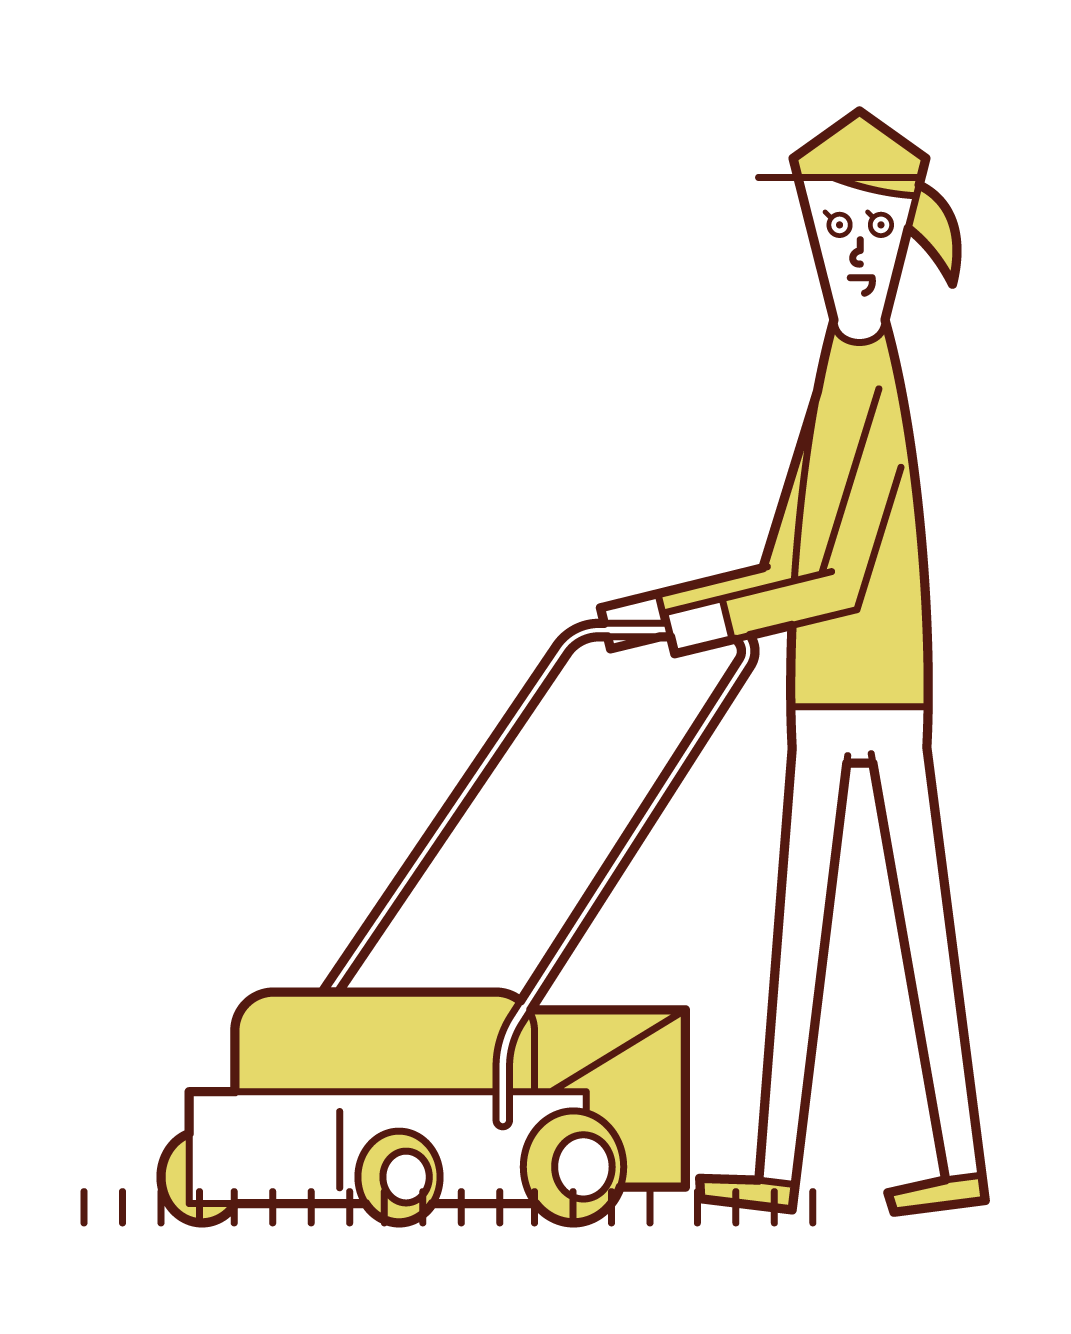 Illustration of a woman using a lawnmower